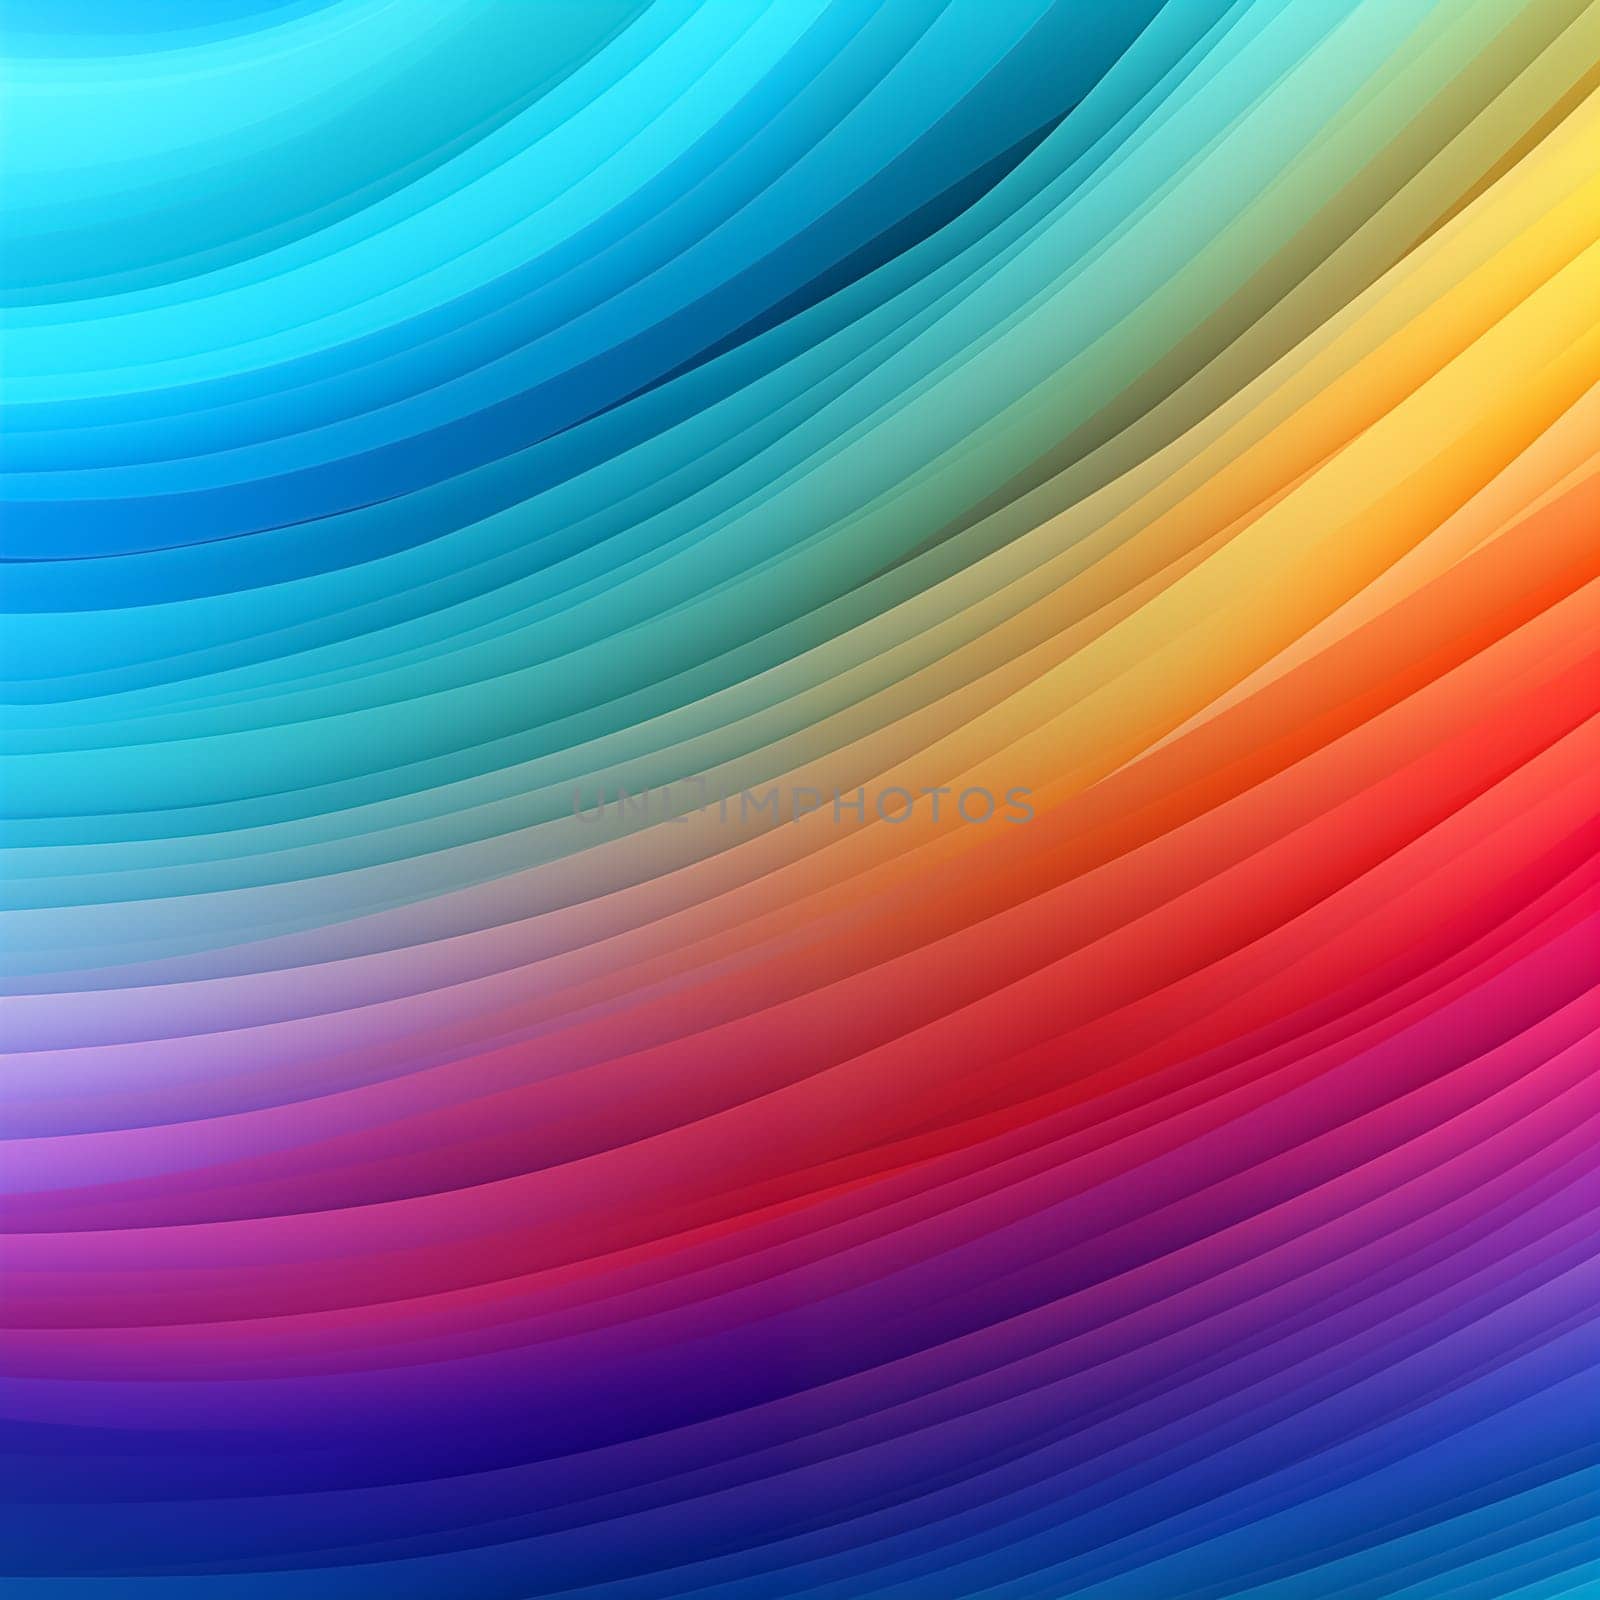 Gradient rainbow background by Nadtochiy